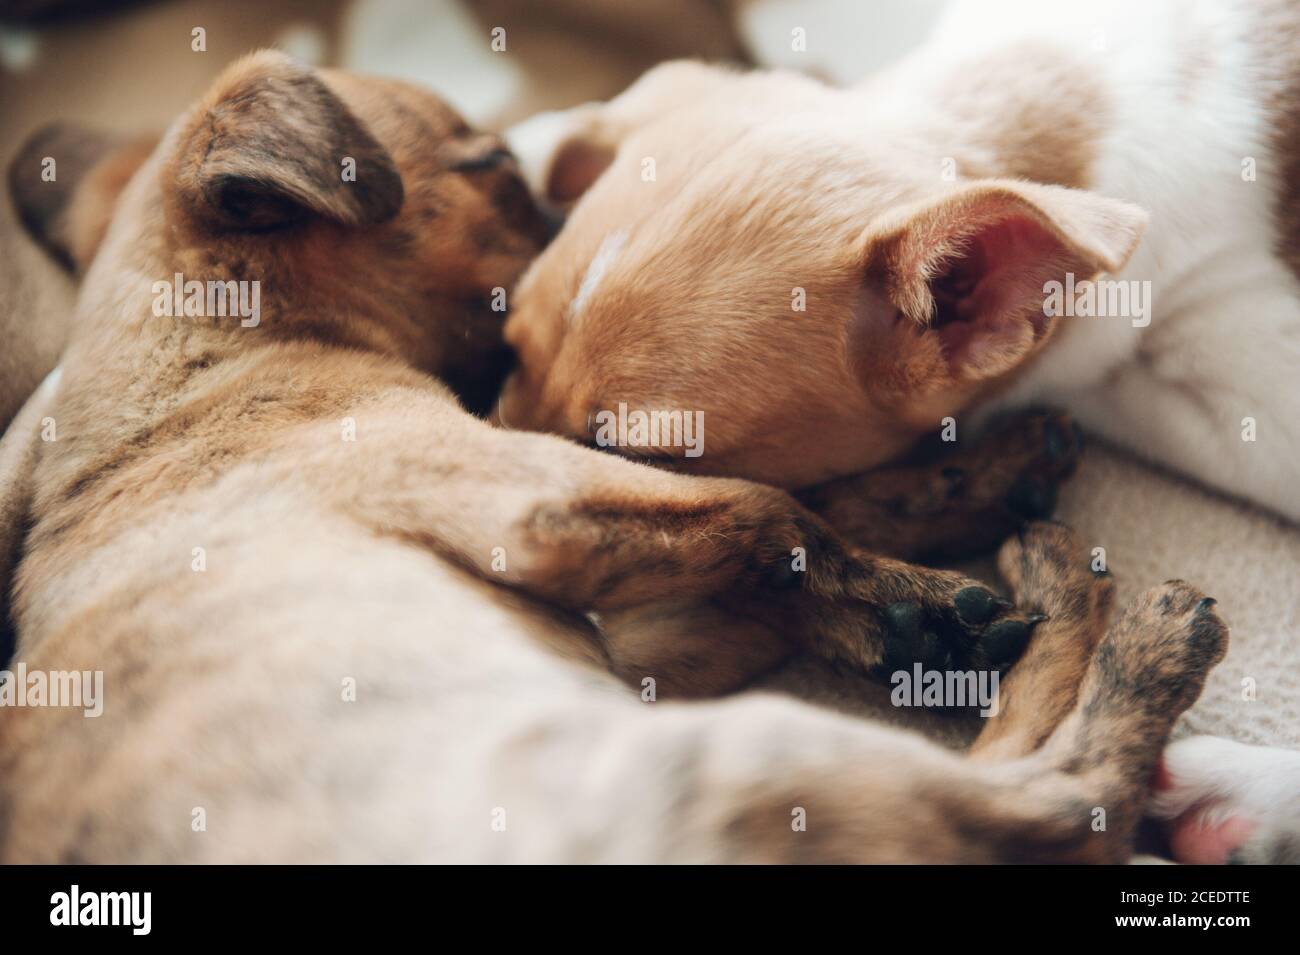 Cute dog and small brown puppy lying and sleeping on cozy plaid at home. Stock Photo